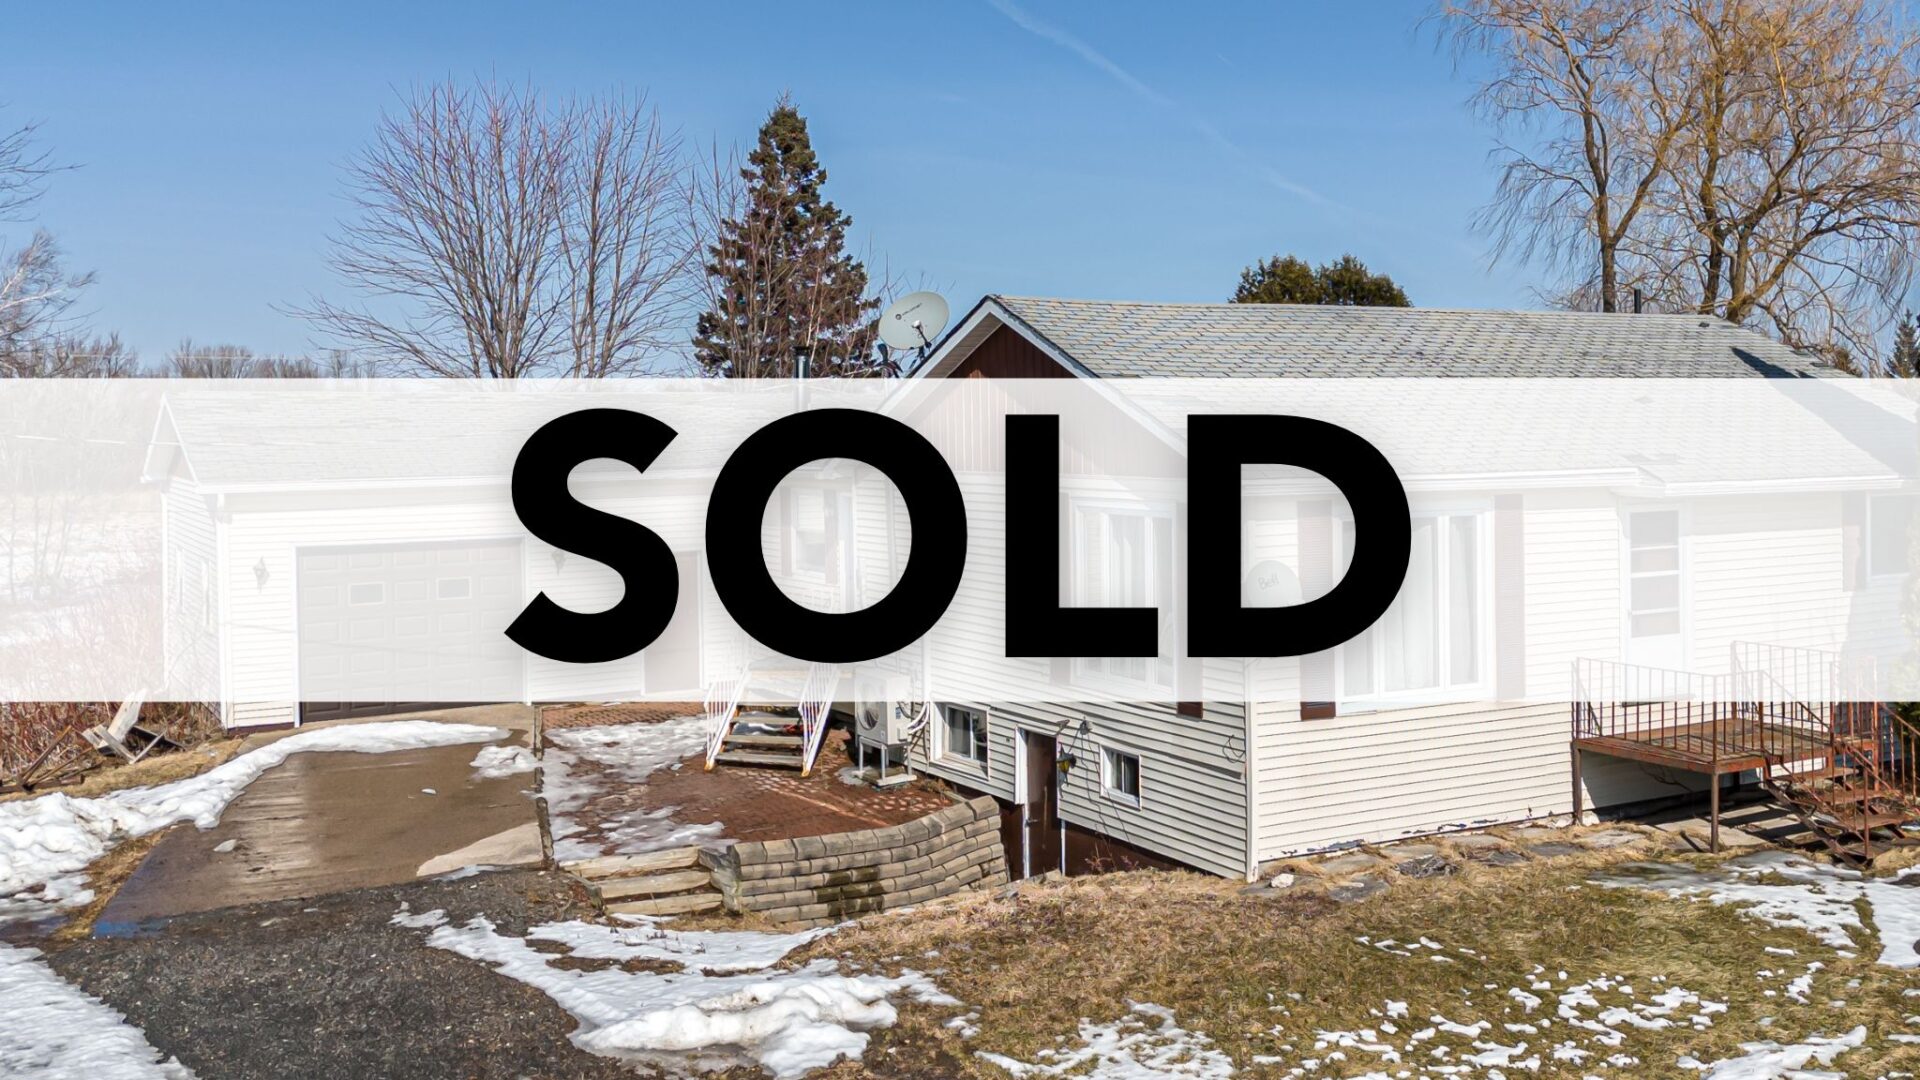 1707 Route 105 Sold